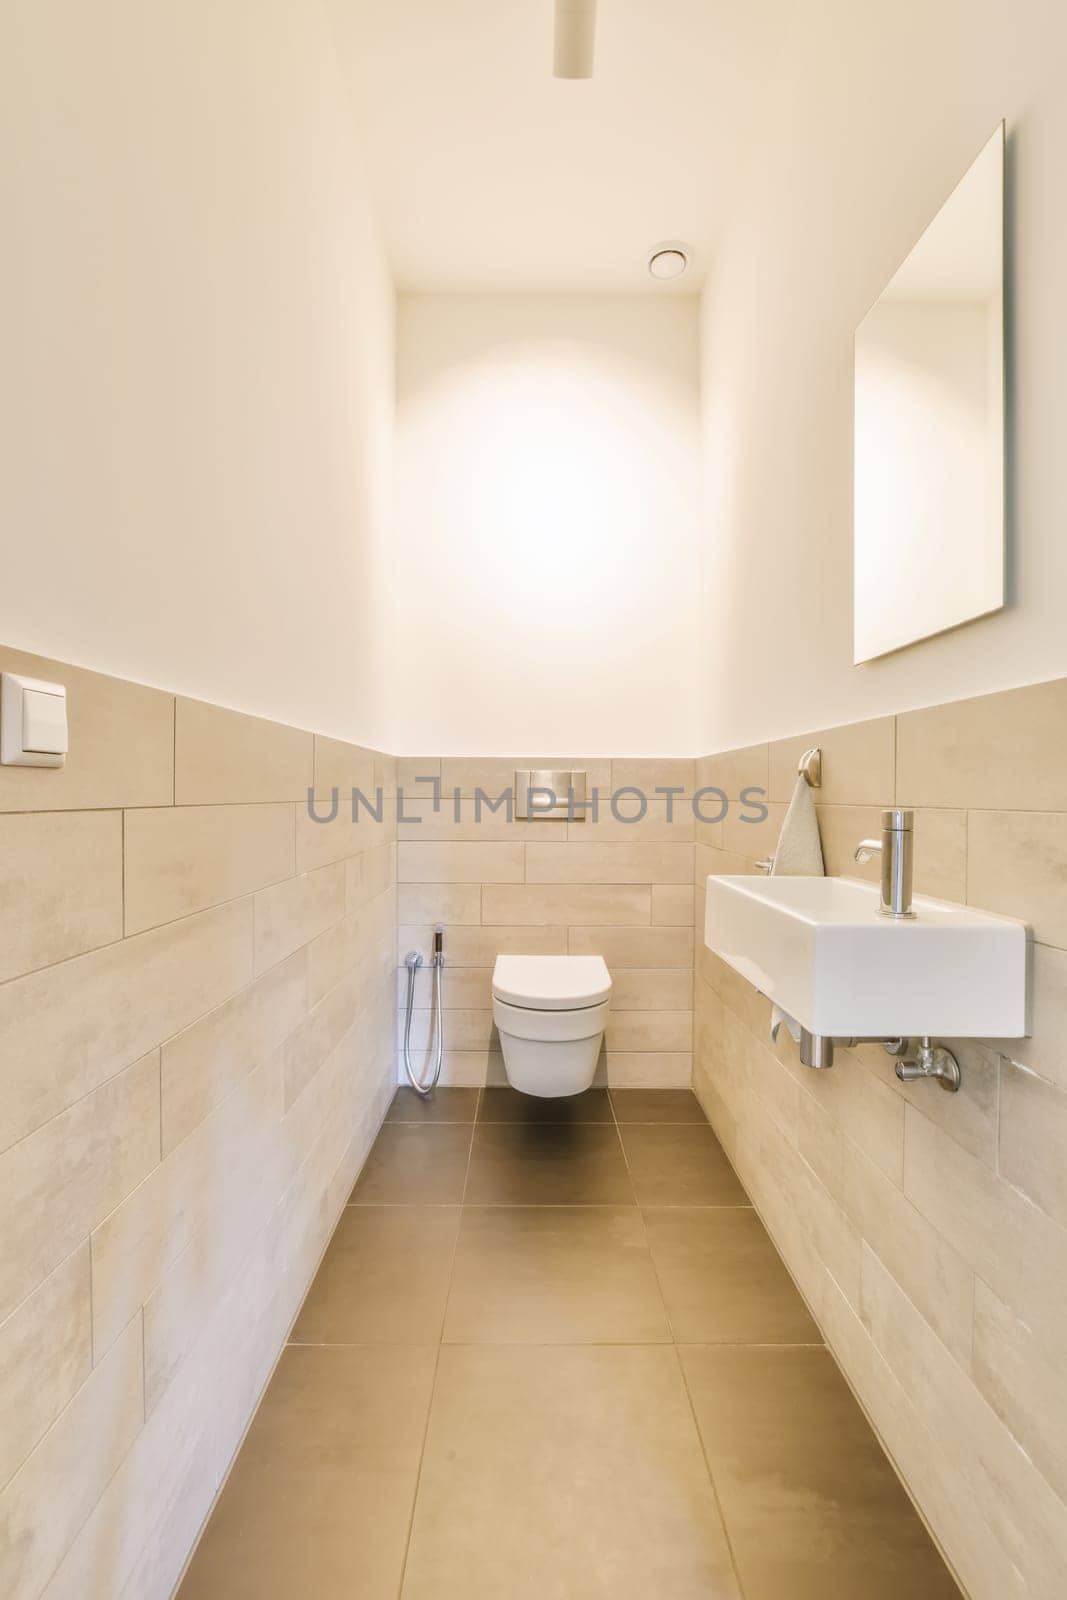 a bathroom that is very clean and ready to be used as a shower room or even in the day time